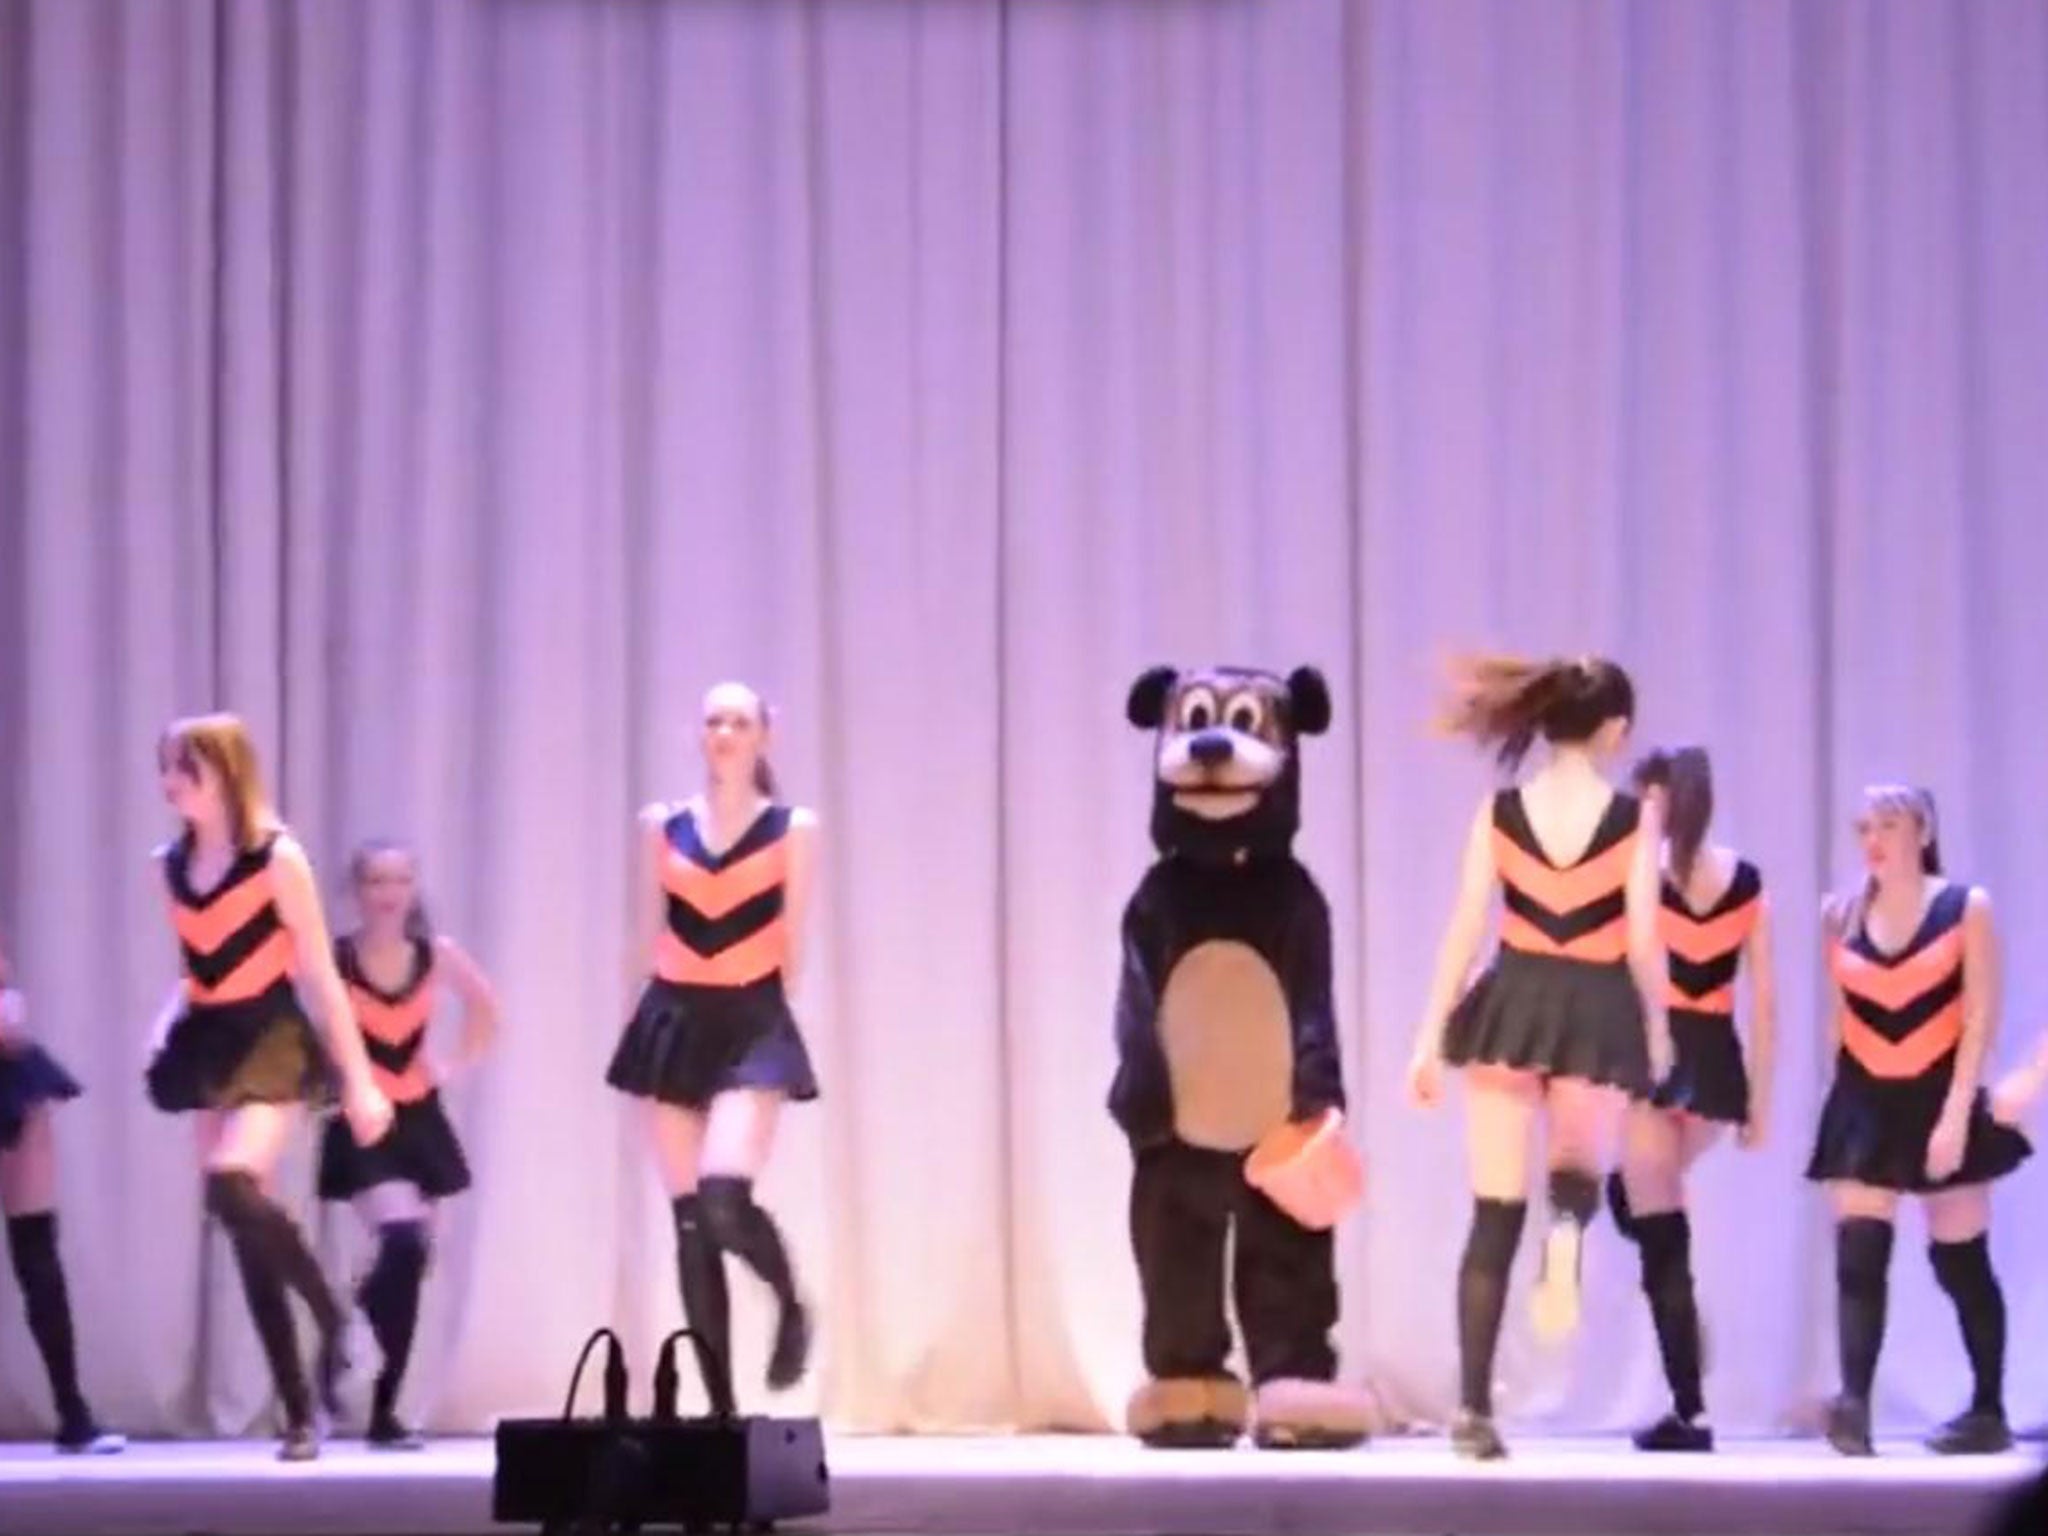 “Bees and Winnie the Pooh” was performed at the Credo school in Orenburg